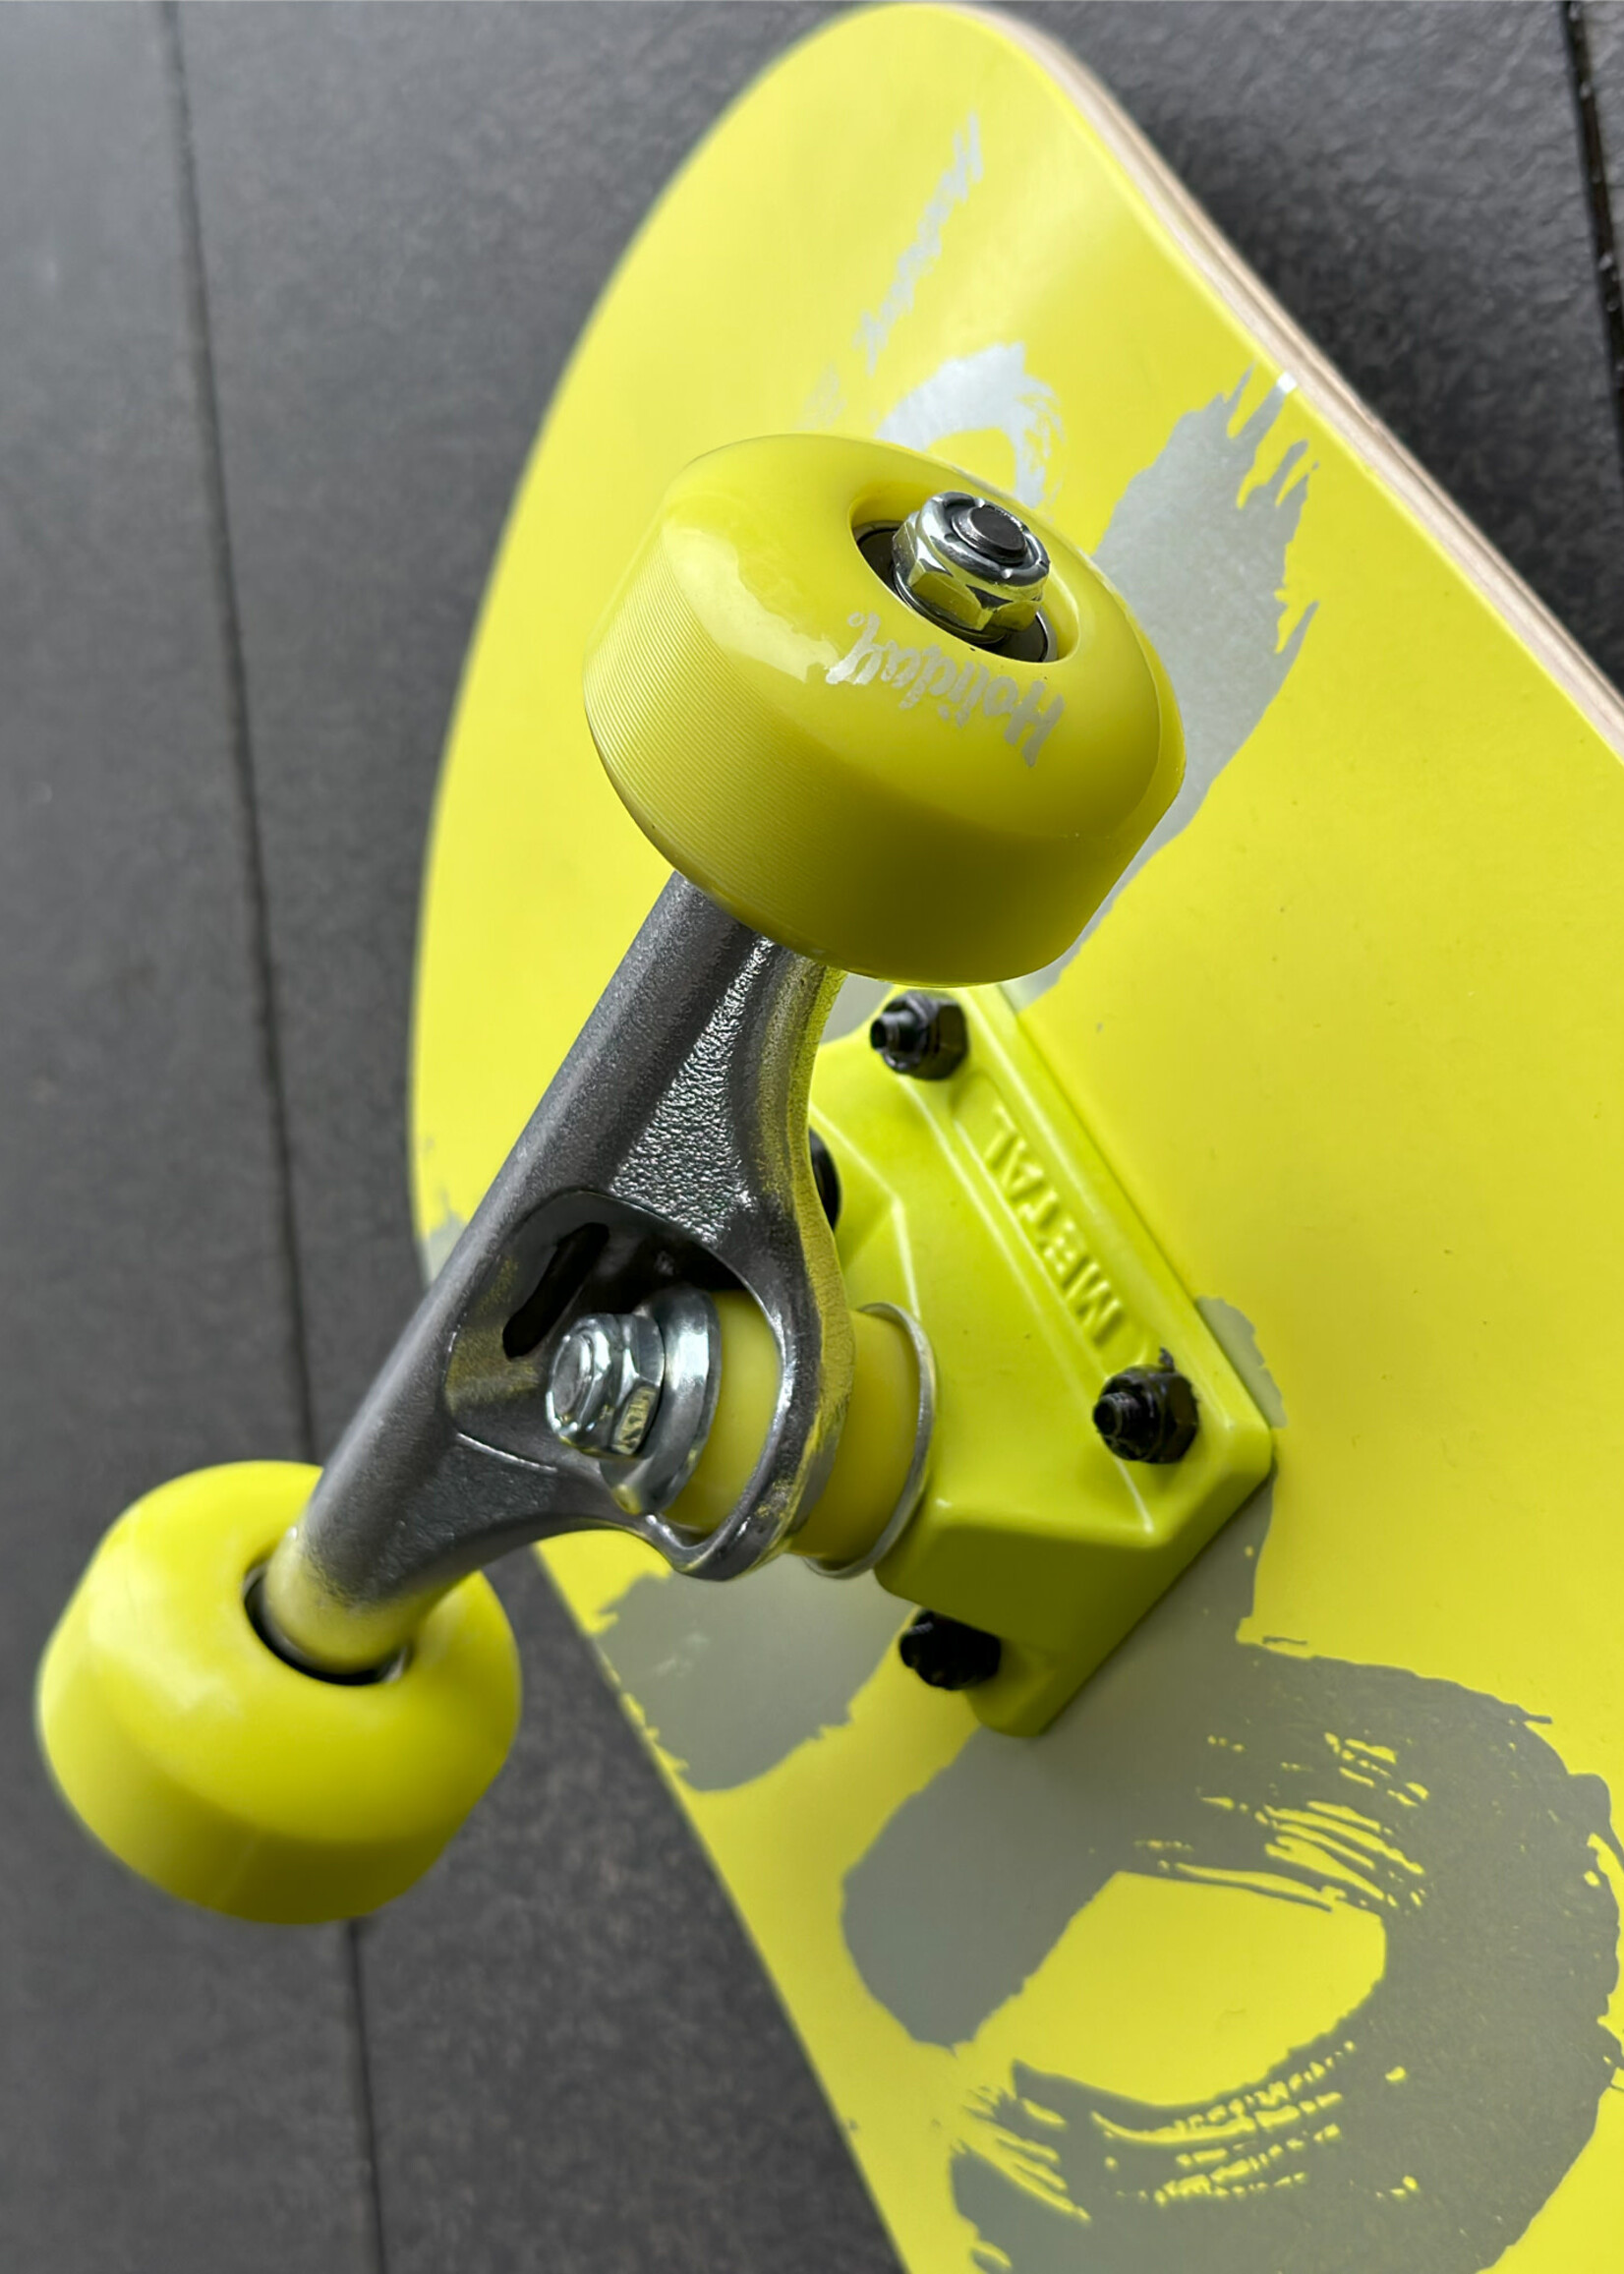 Holiday Skateboards Holiday Skateboards - Safety Yellow - Complete 7.625"